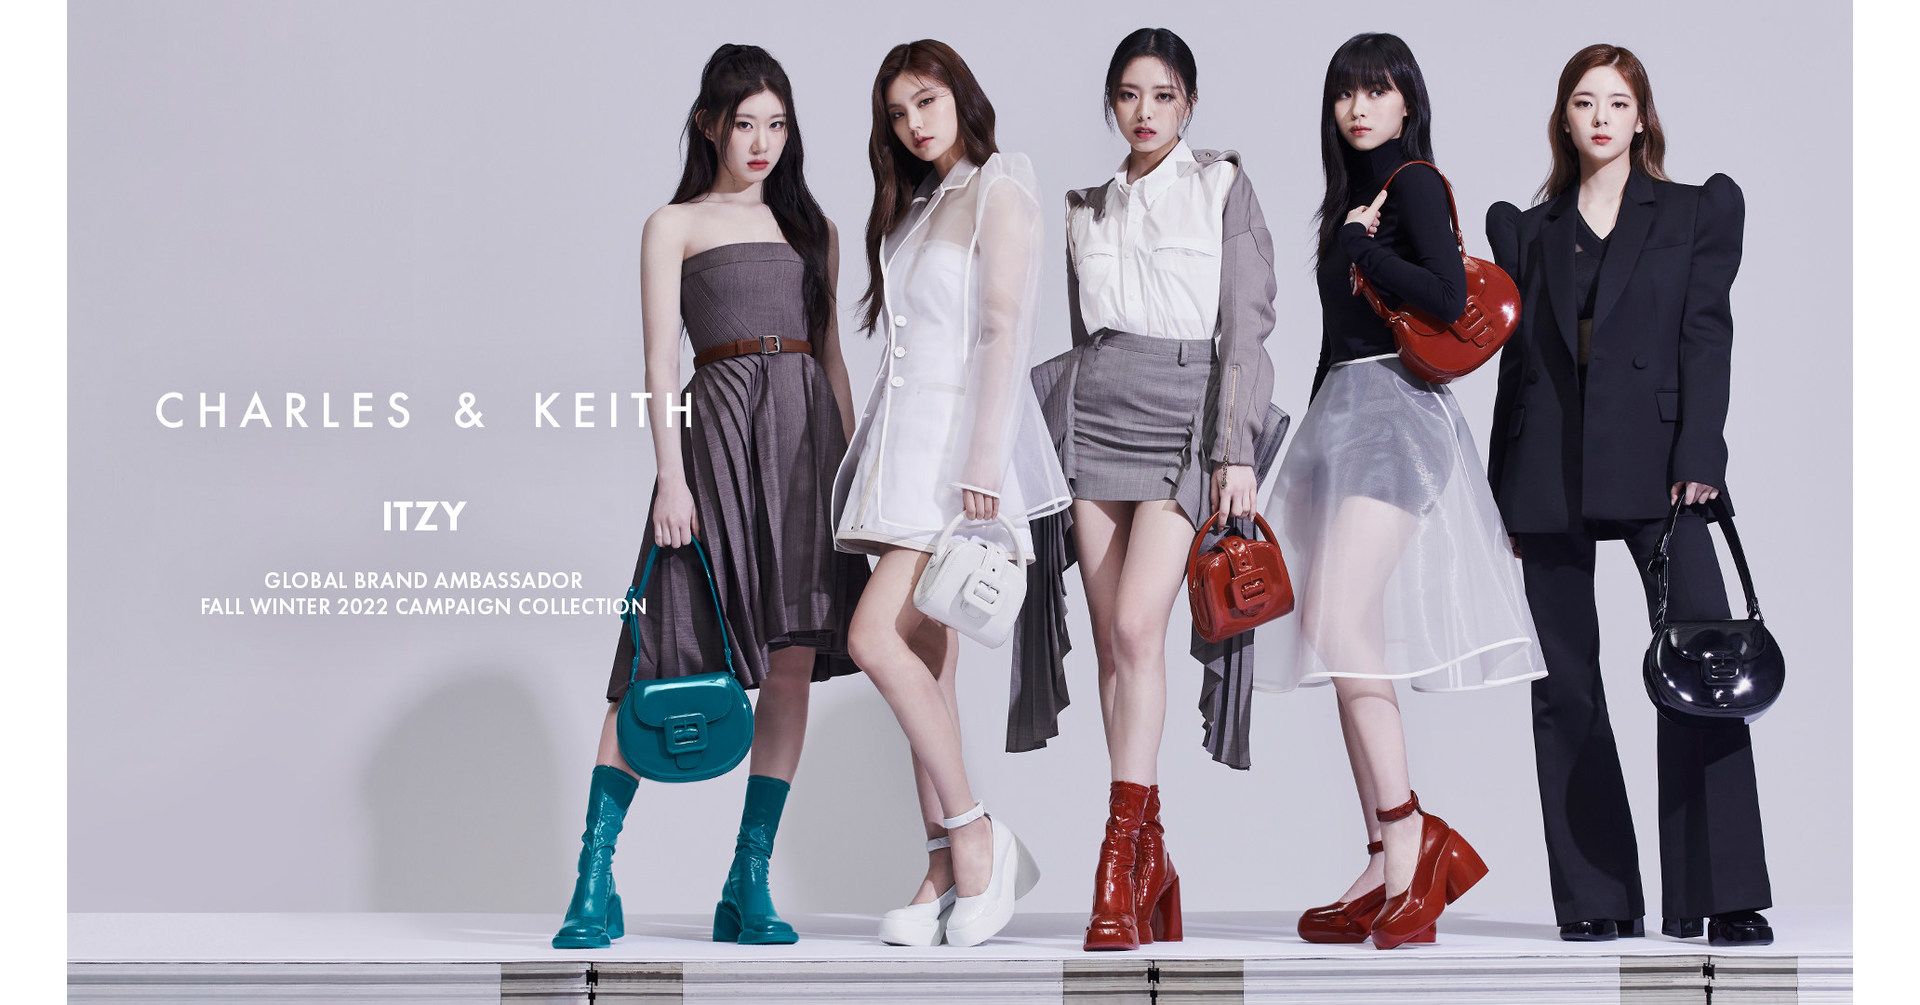 Charles & Keith - A Successful Asian Global Fast Fashion Retail Brand